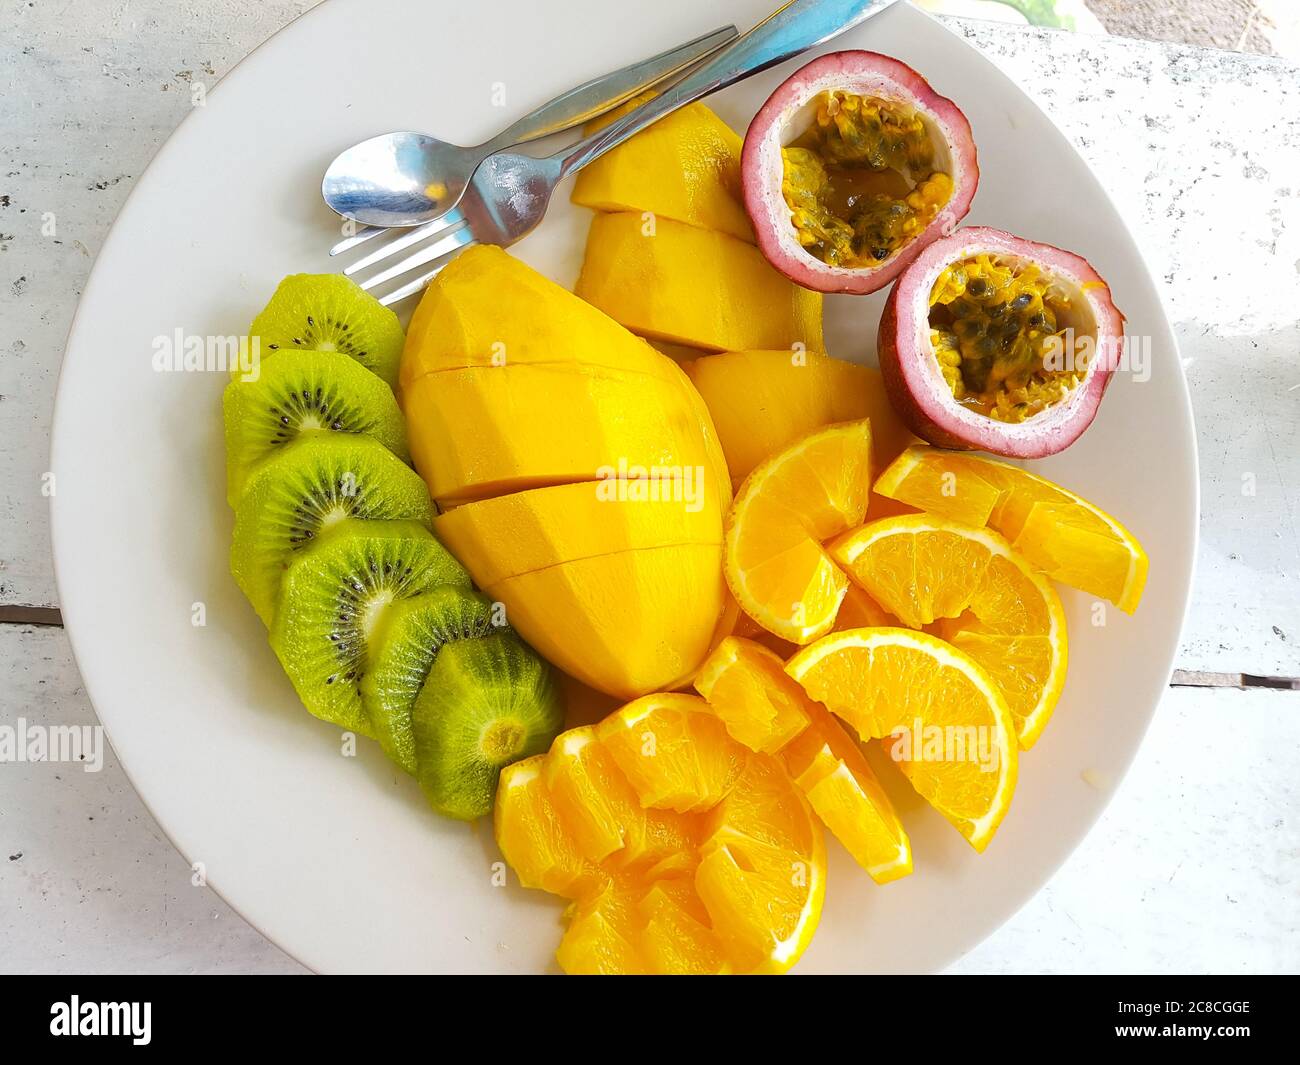 Portrait of Healthy Fruits Served On Plate Stock Photo